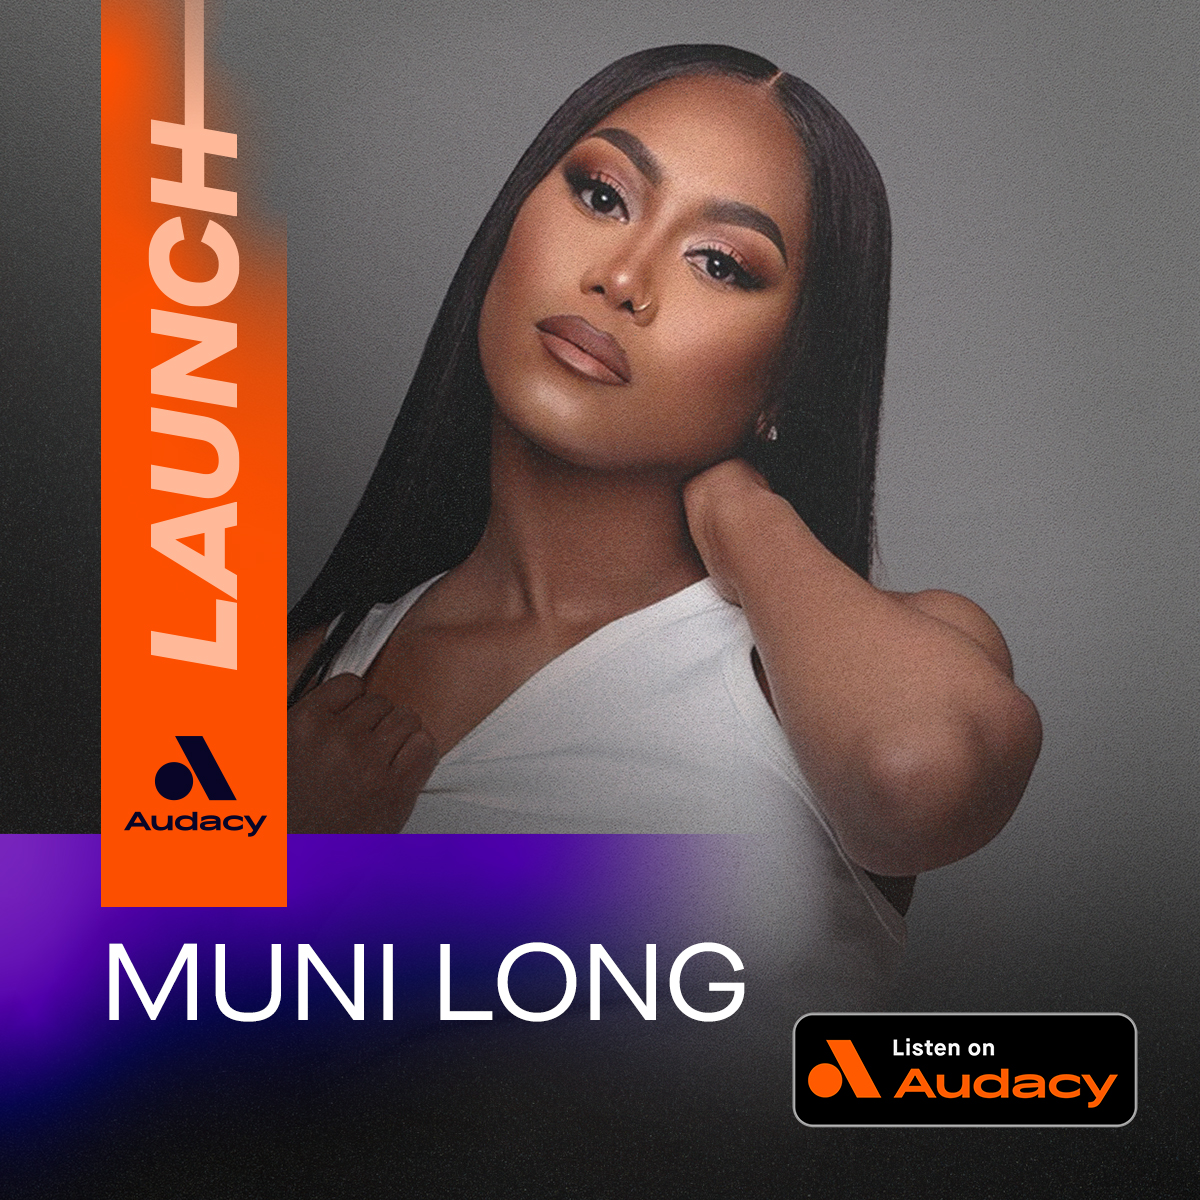 Muni Long on 'Made For Me'